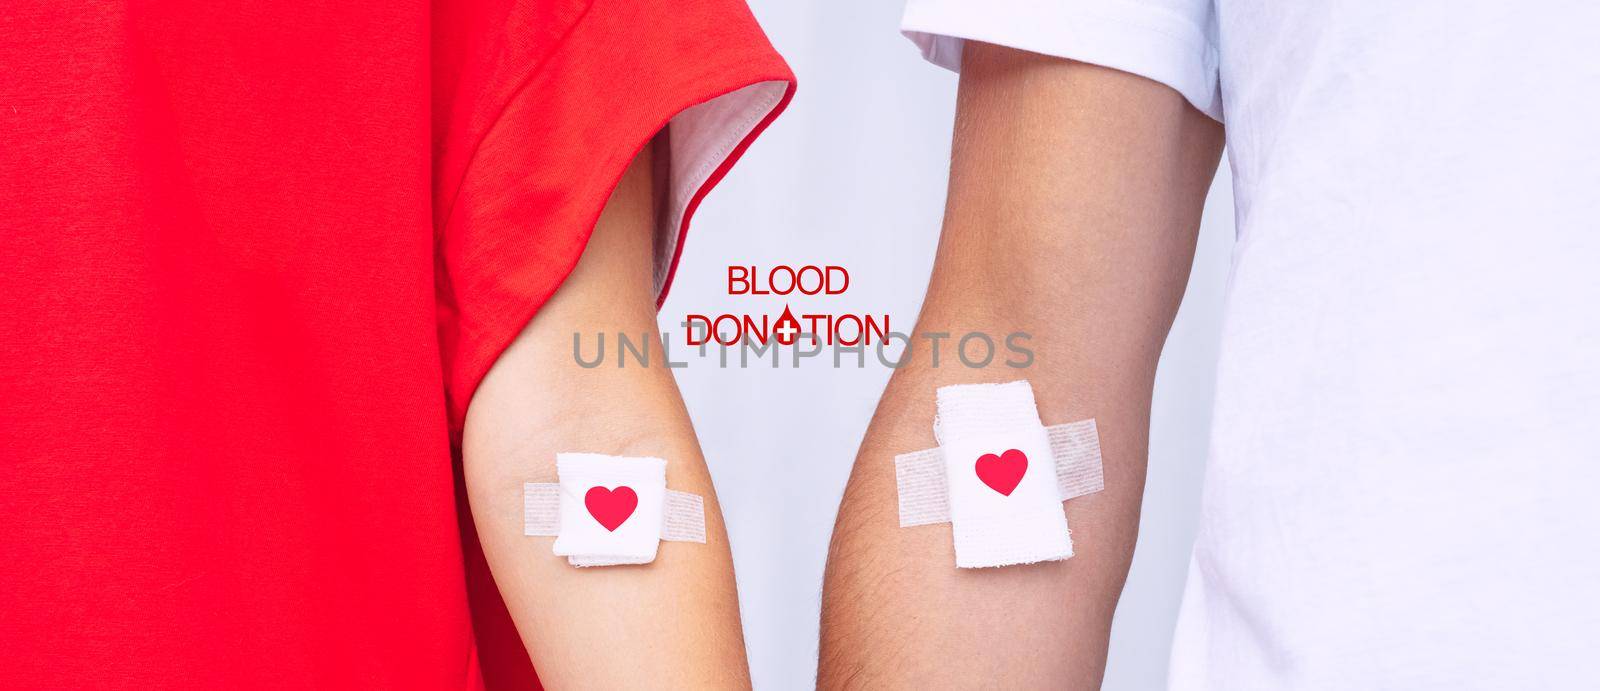 Blood donors with bandage after giving blood. Blood donation, save lives. World blood donor day concept. High quality photo